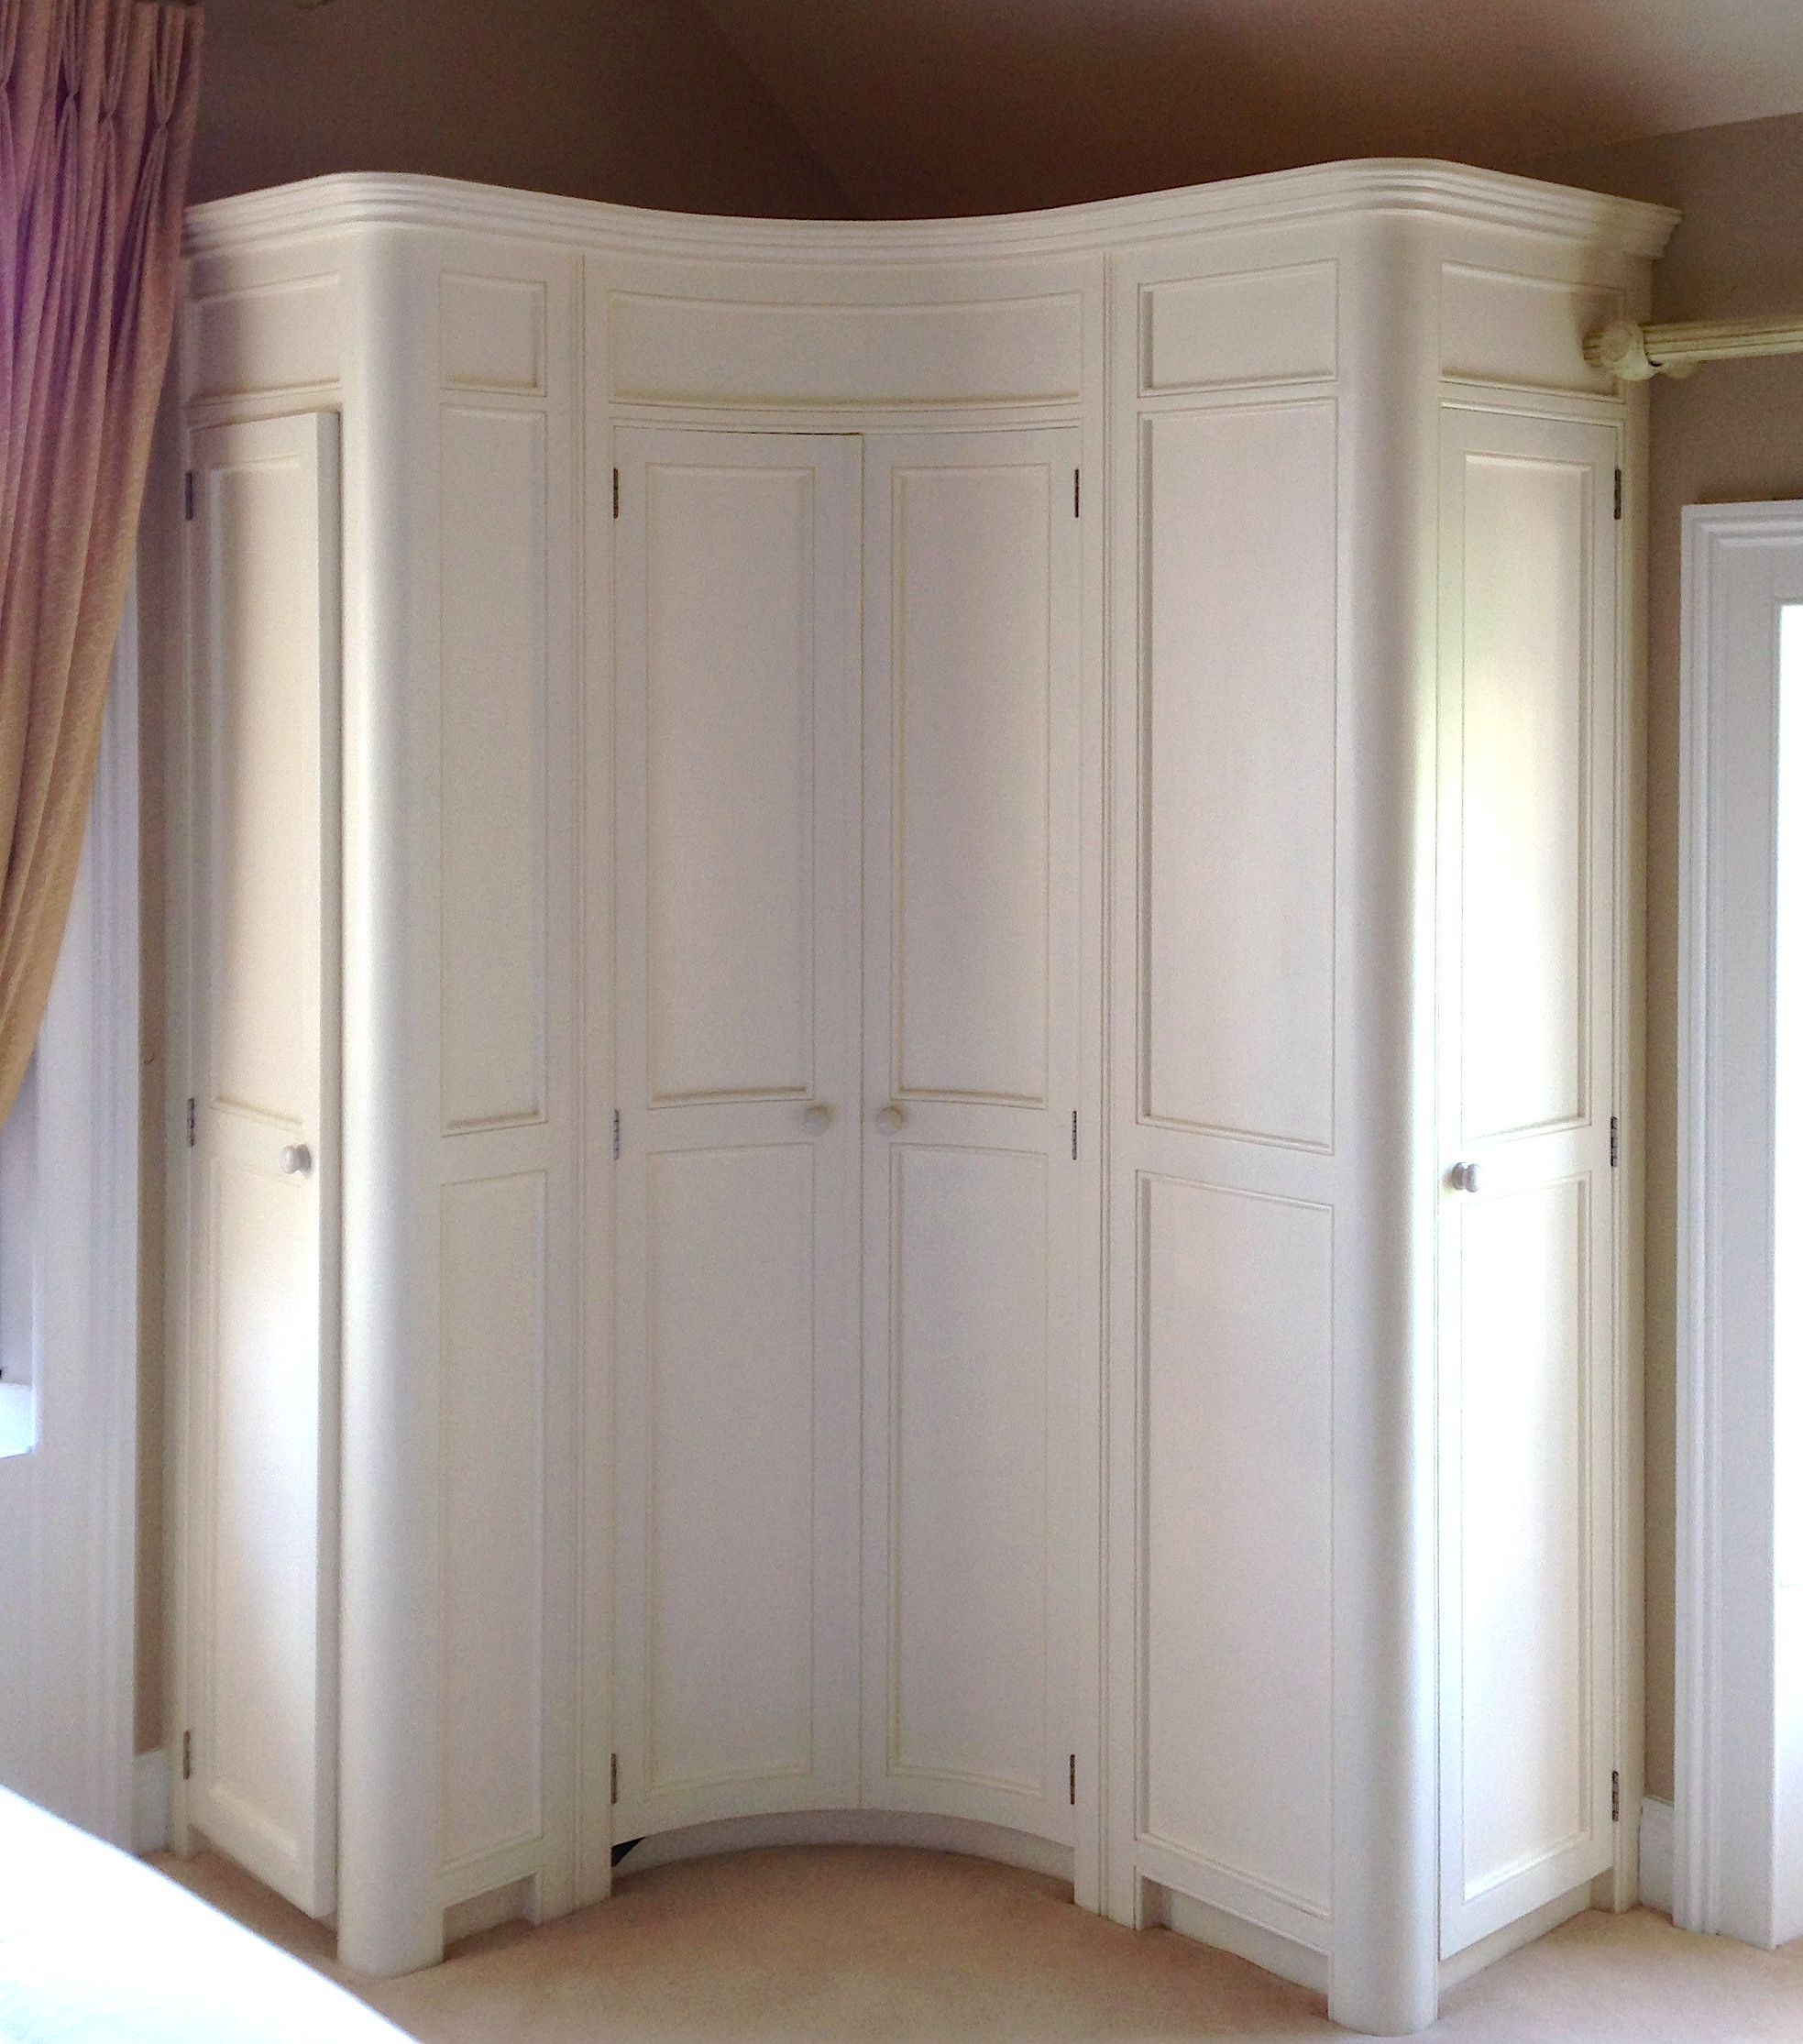 Curved Fitted Corner Wardrobe Hand Painted In A Cream  Www.linehansdesign Https://www.facebo… | Corner Wardrobe, Corner  Wardrobe Closet, Fitted Bedroom Furniture With Regard To Curved Corner Wardrobes Doors (Gallery 11 of 20)